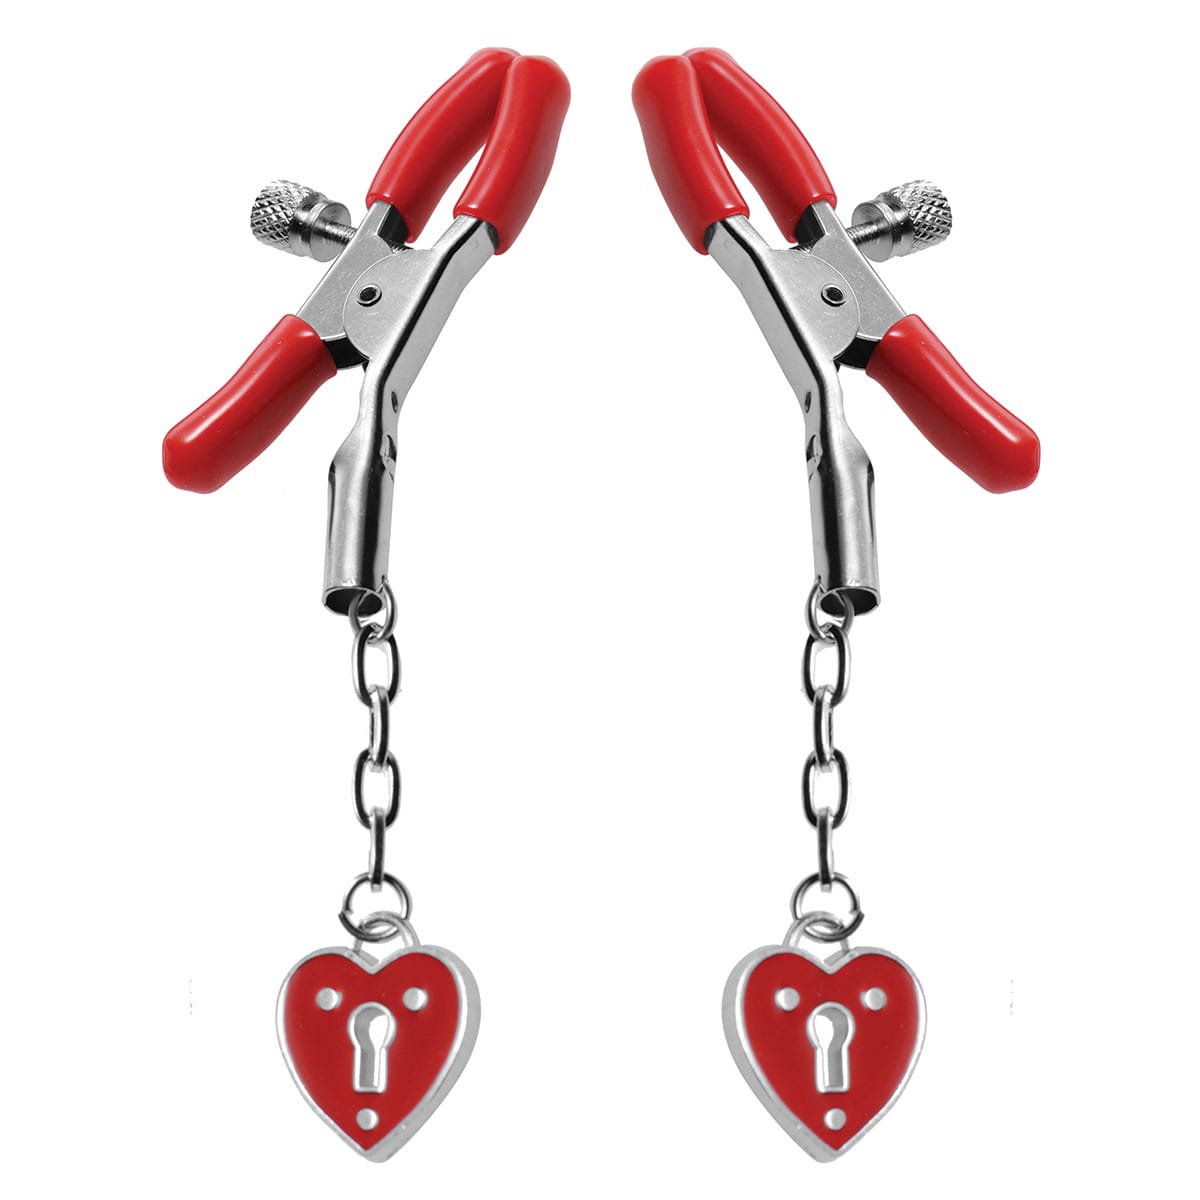 Buy and try Heart Padlock Nipple Clamps Red nipple stimulation tool.